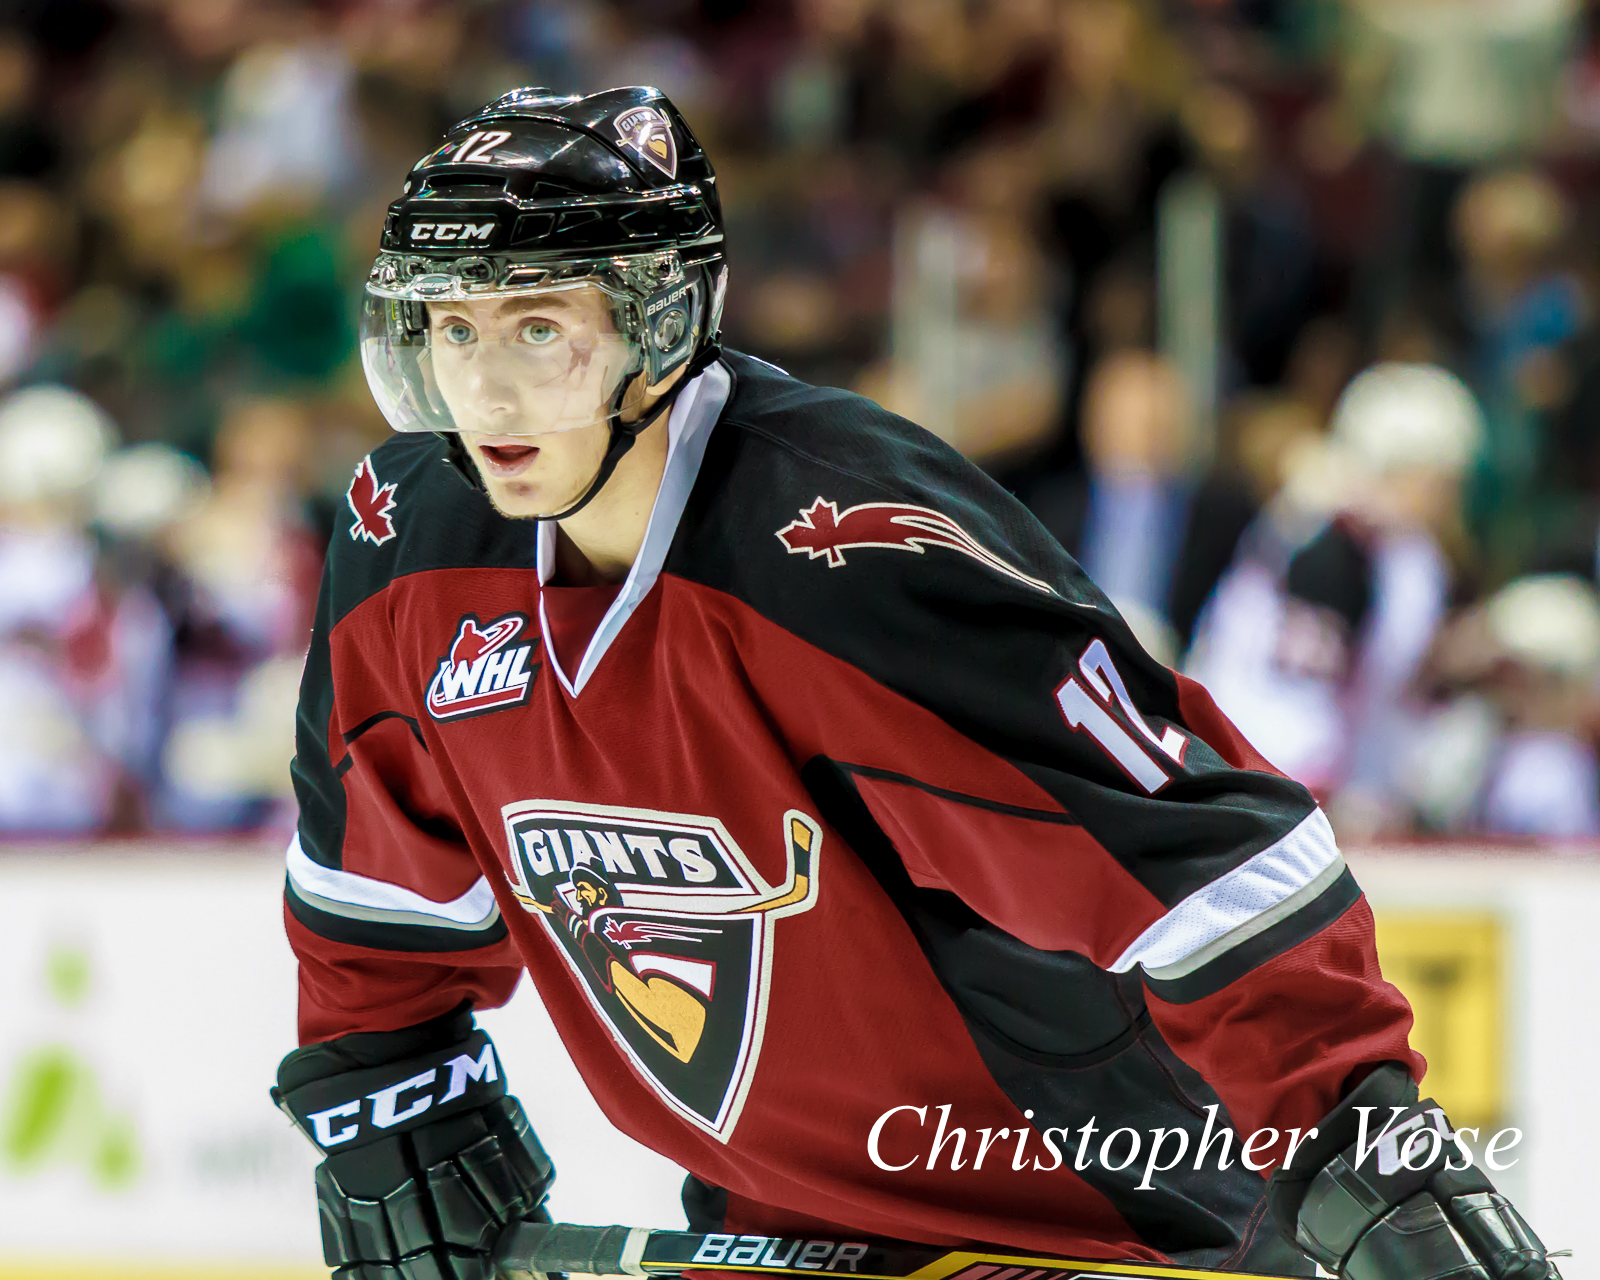 Vancouver Giants on X: In honour of the 07' Memorial Cup Champion